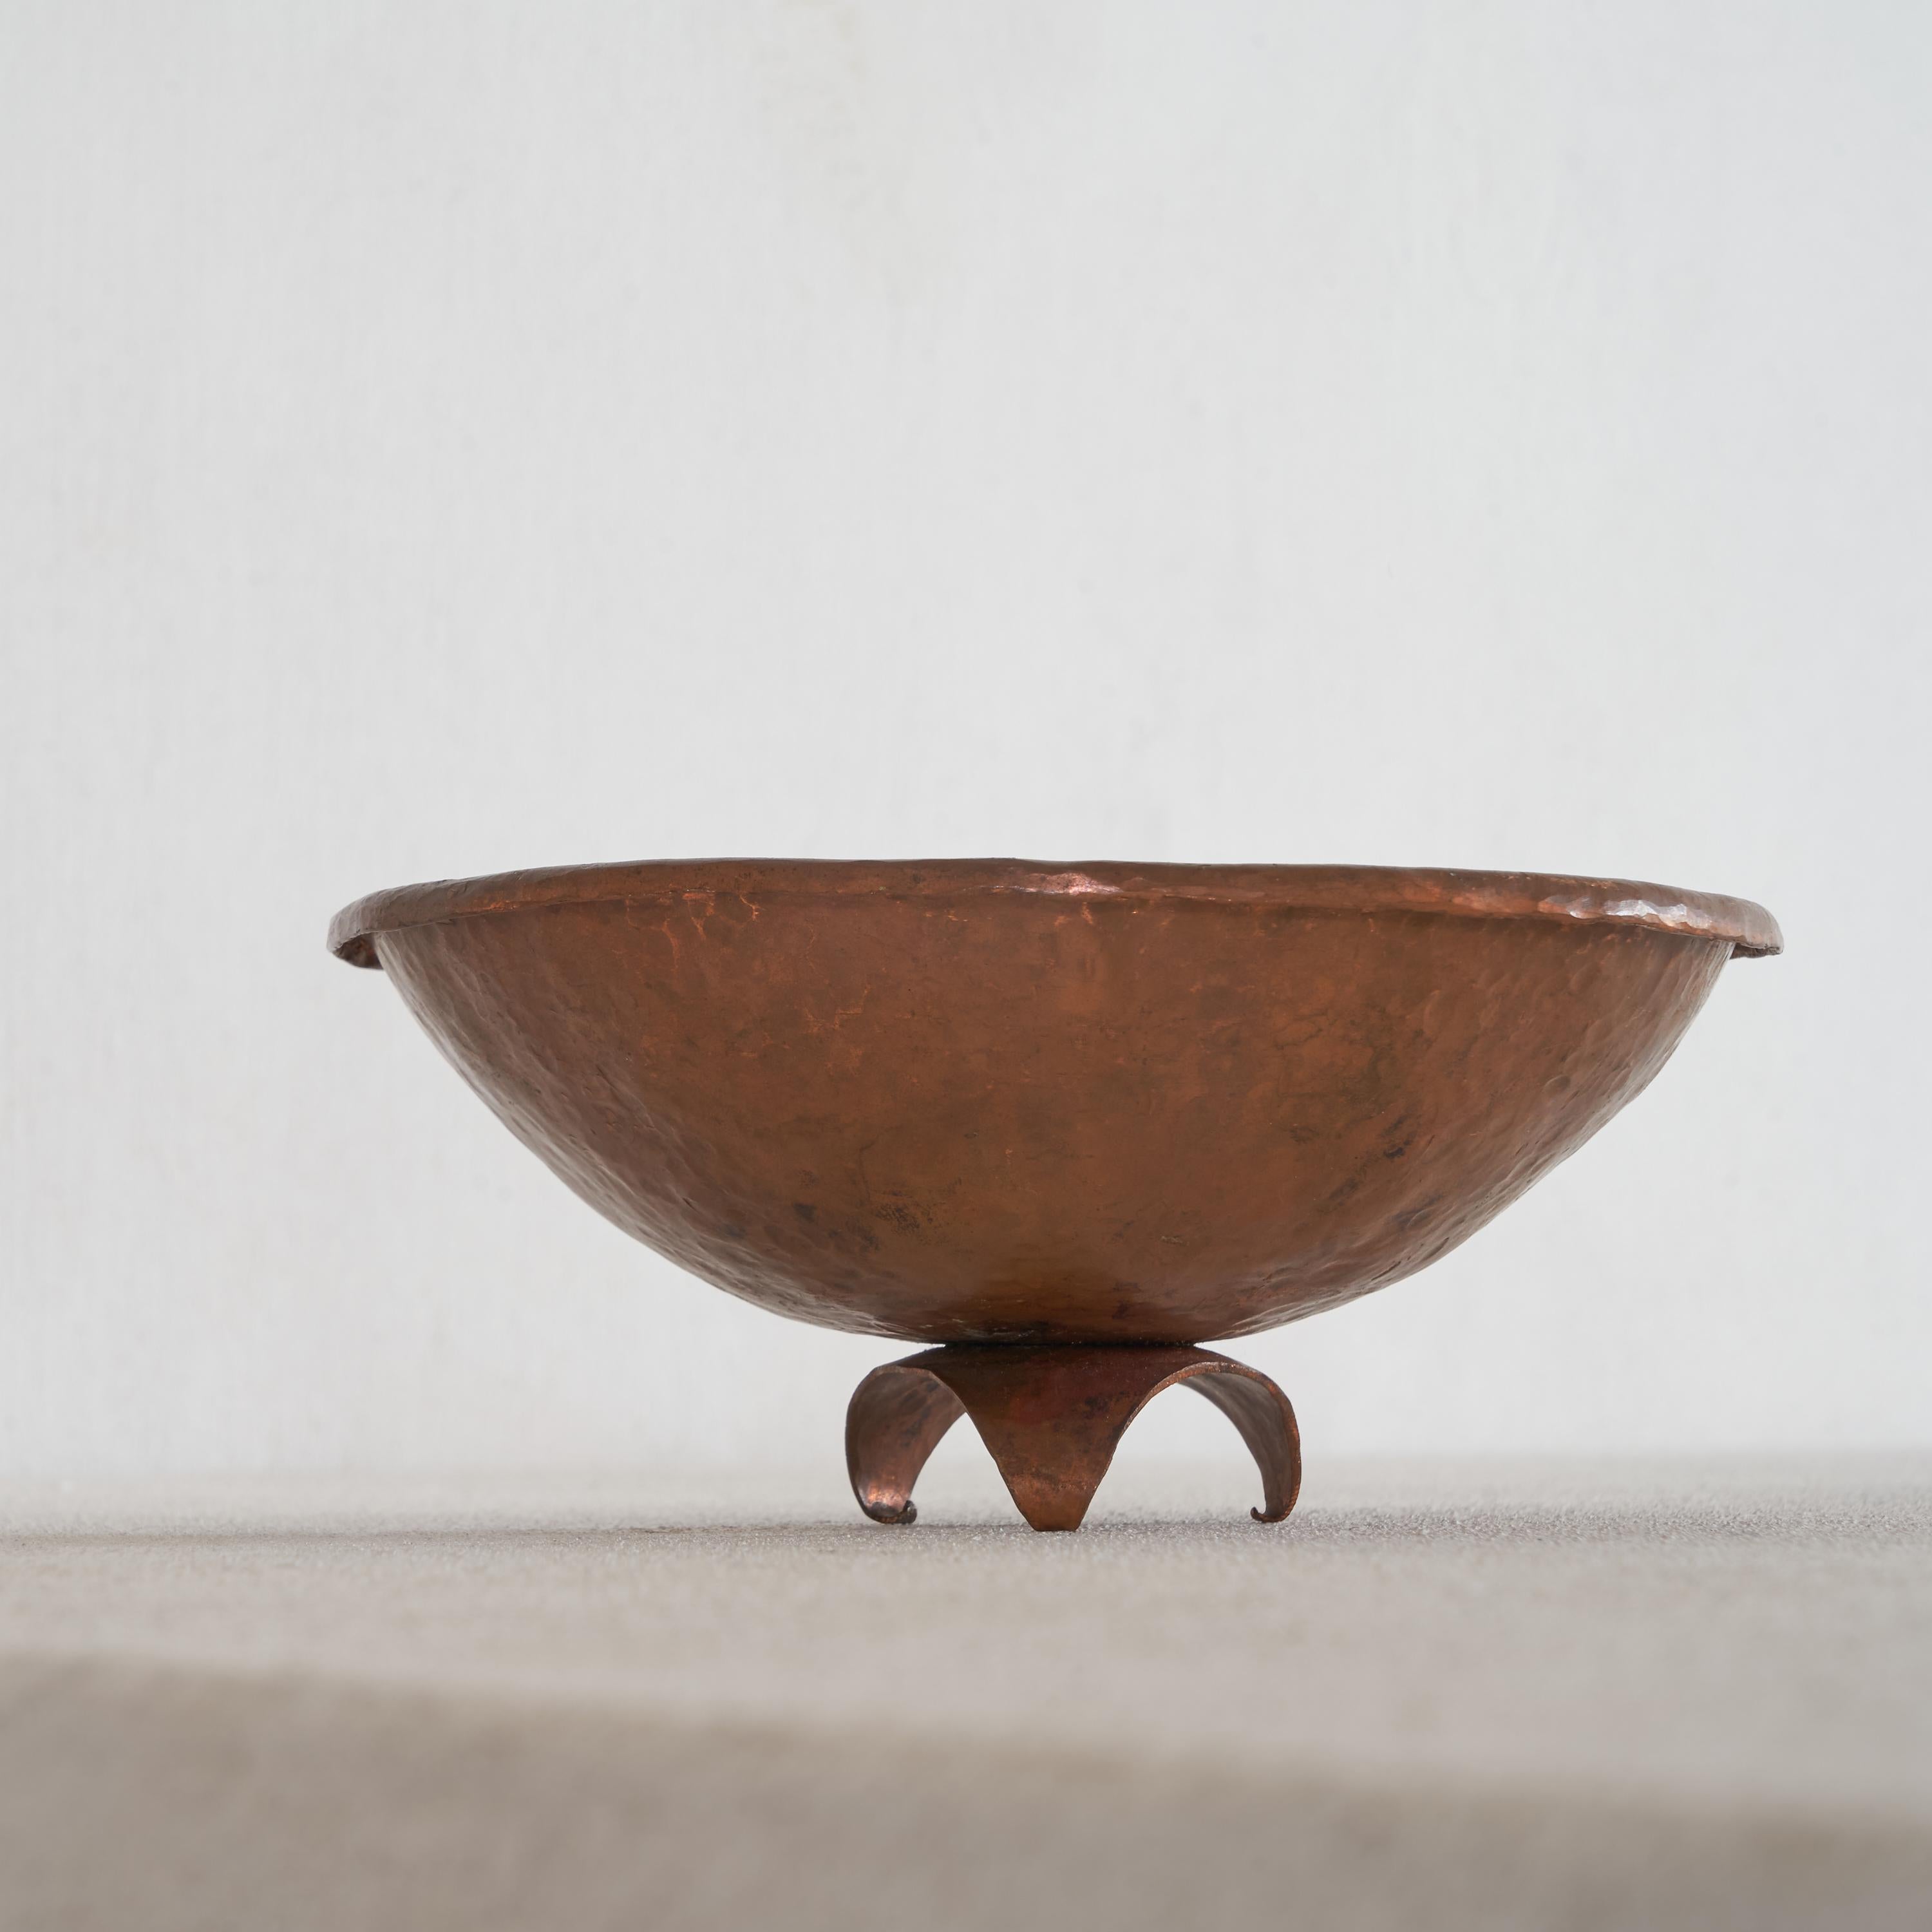 Beautiful little hand hammered bowl in copper with playful feet. Simple forms but very sculptural and the hand hammered top rim is a piece of art itself.
 
Probably from a mid century church. We also have a matching wall mounted bowl available.